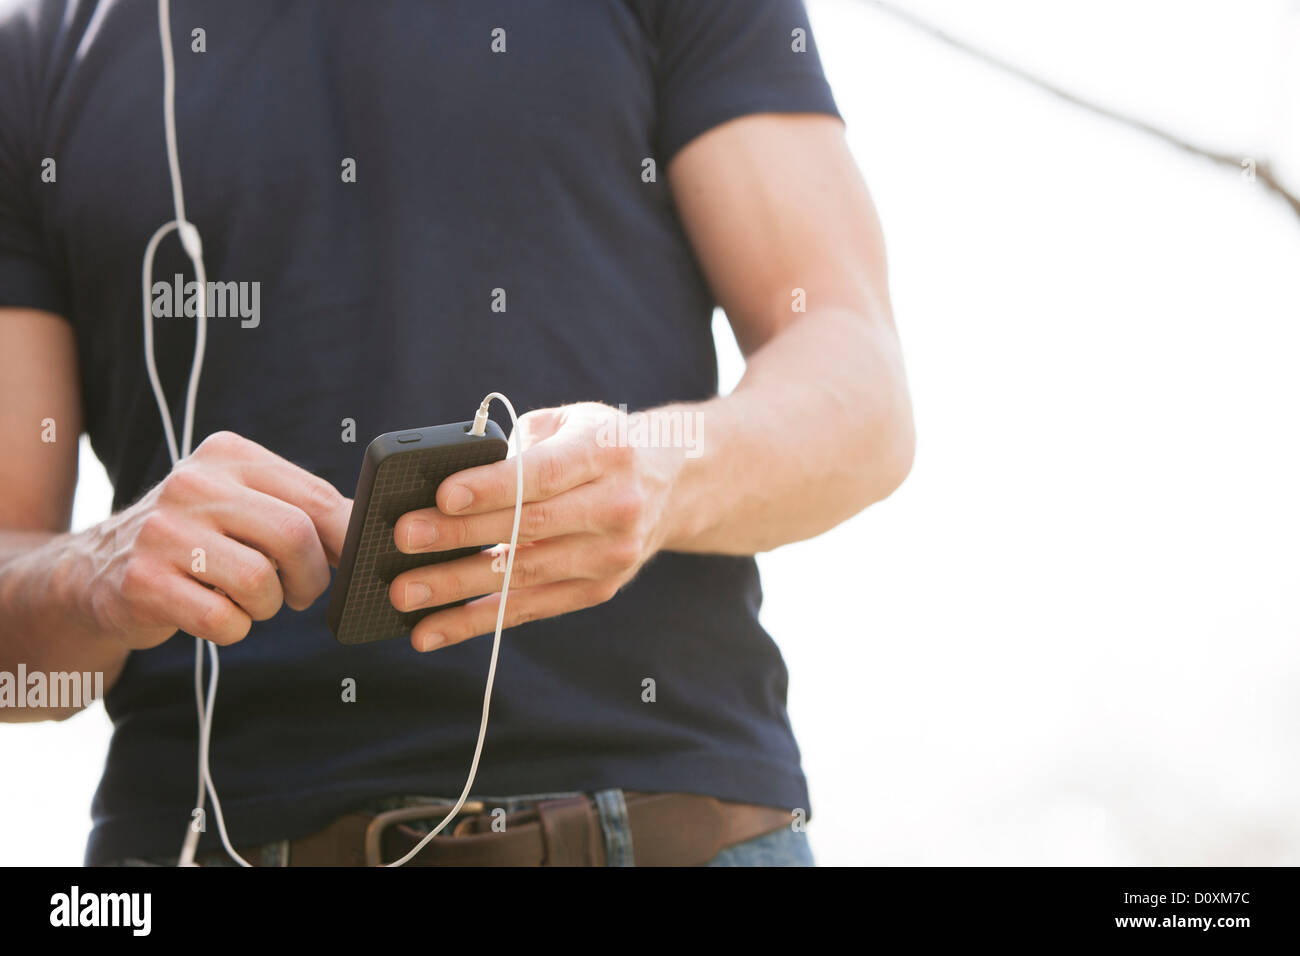 Young man with smartphone and earphones Stock Photo